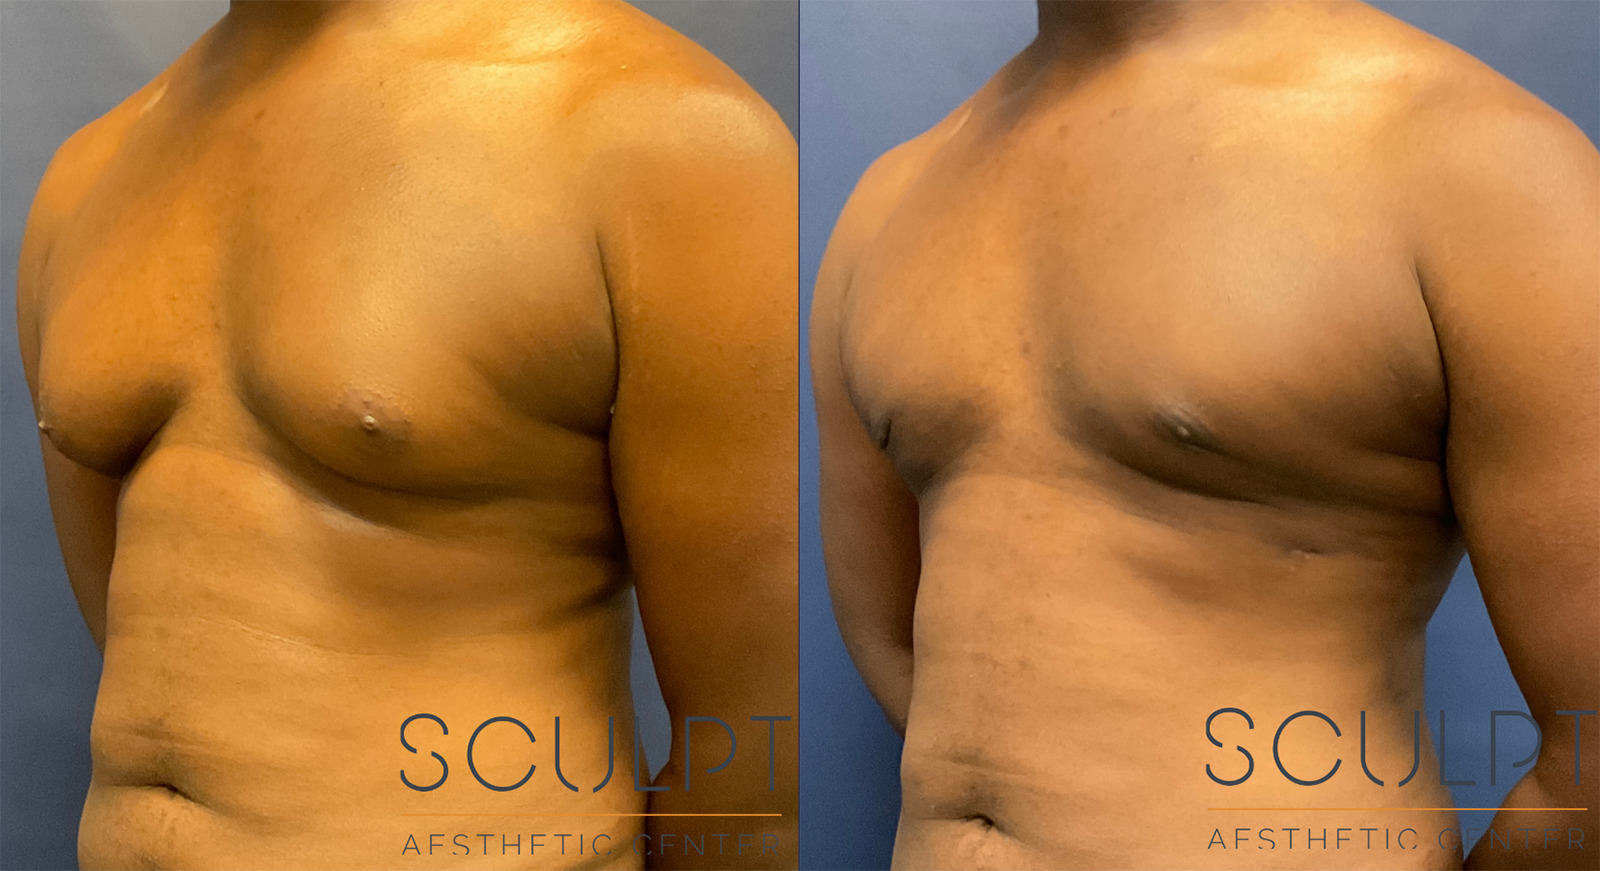 Gynecomastia Before and After Photo by Sculpt Aesthetic Center in Frisco, TX